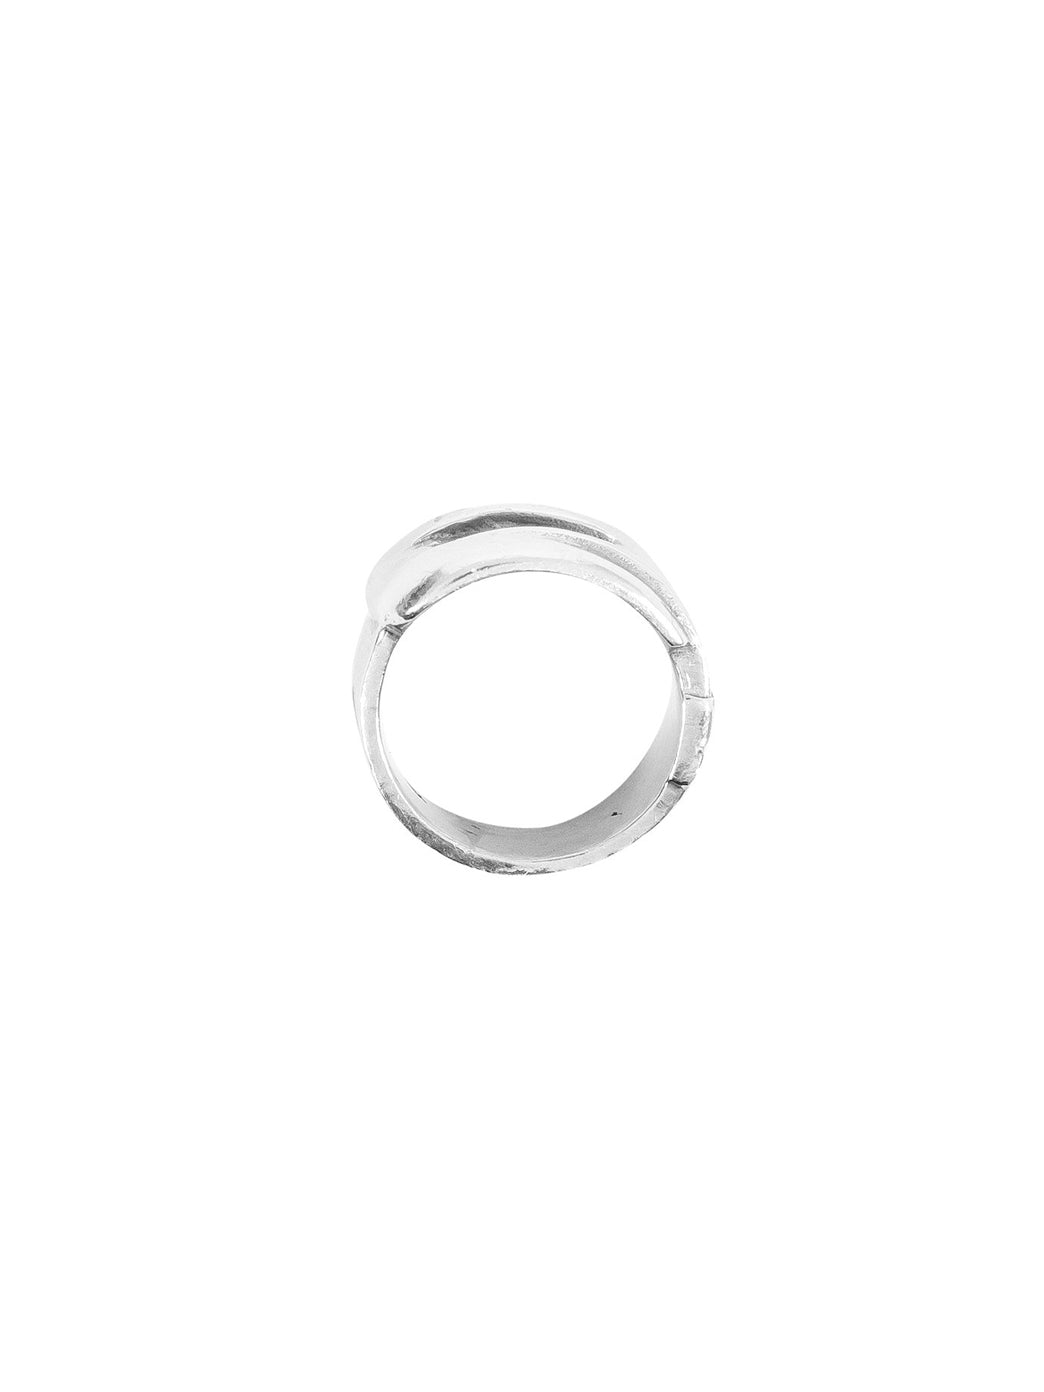 Fiorina Jewellery Mens Buckle Ring Side